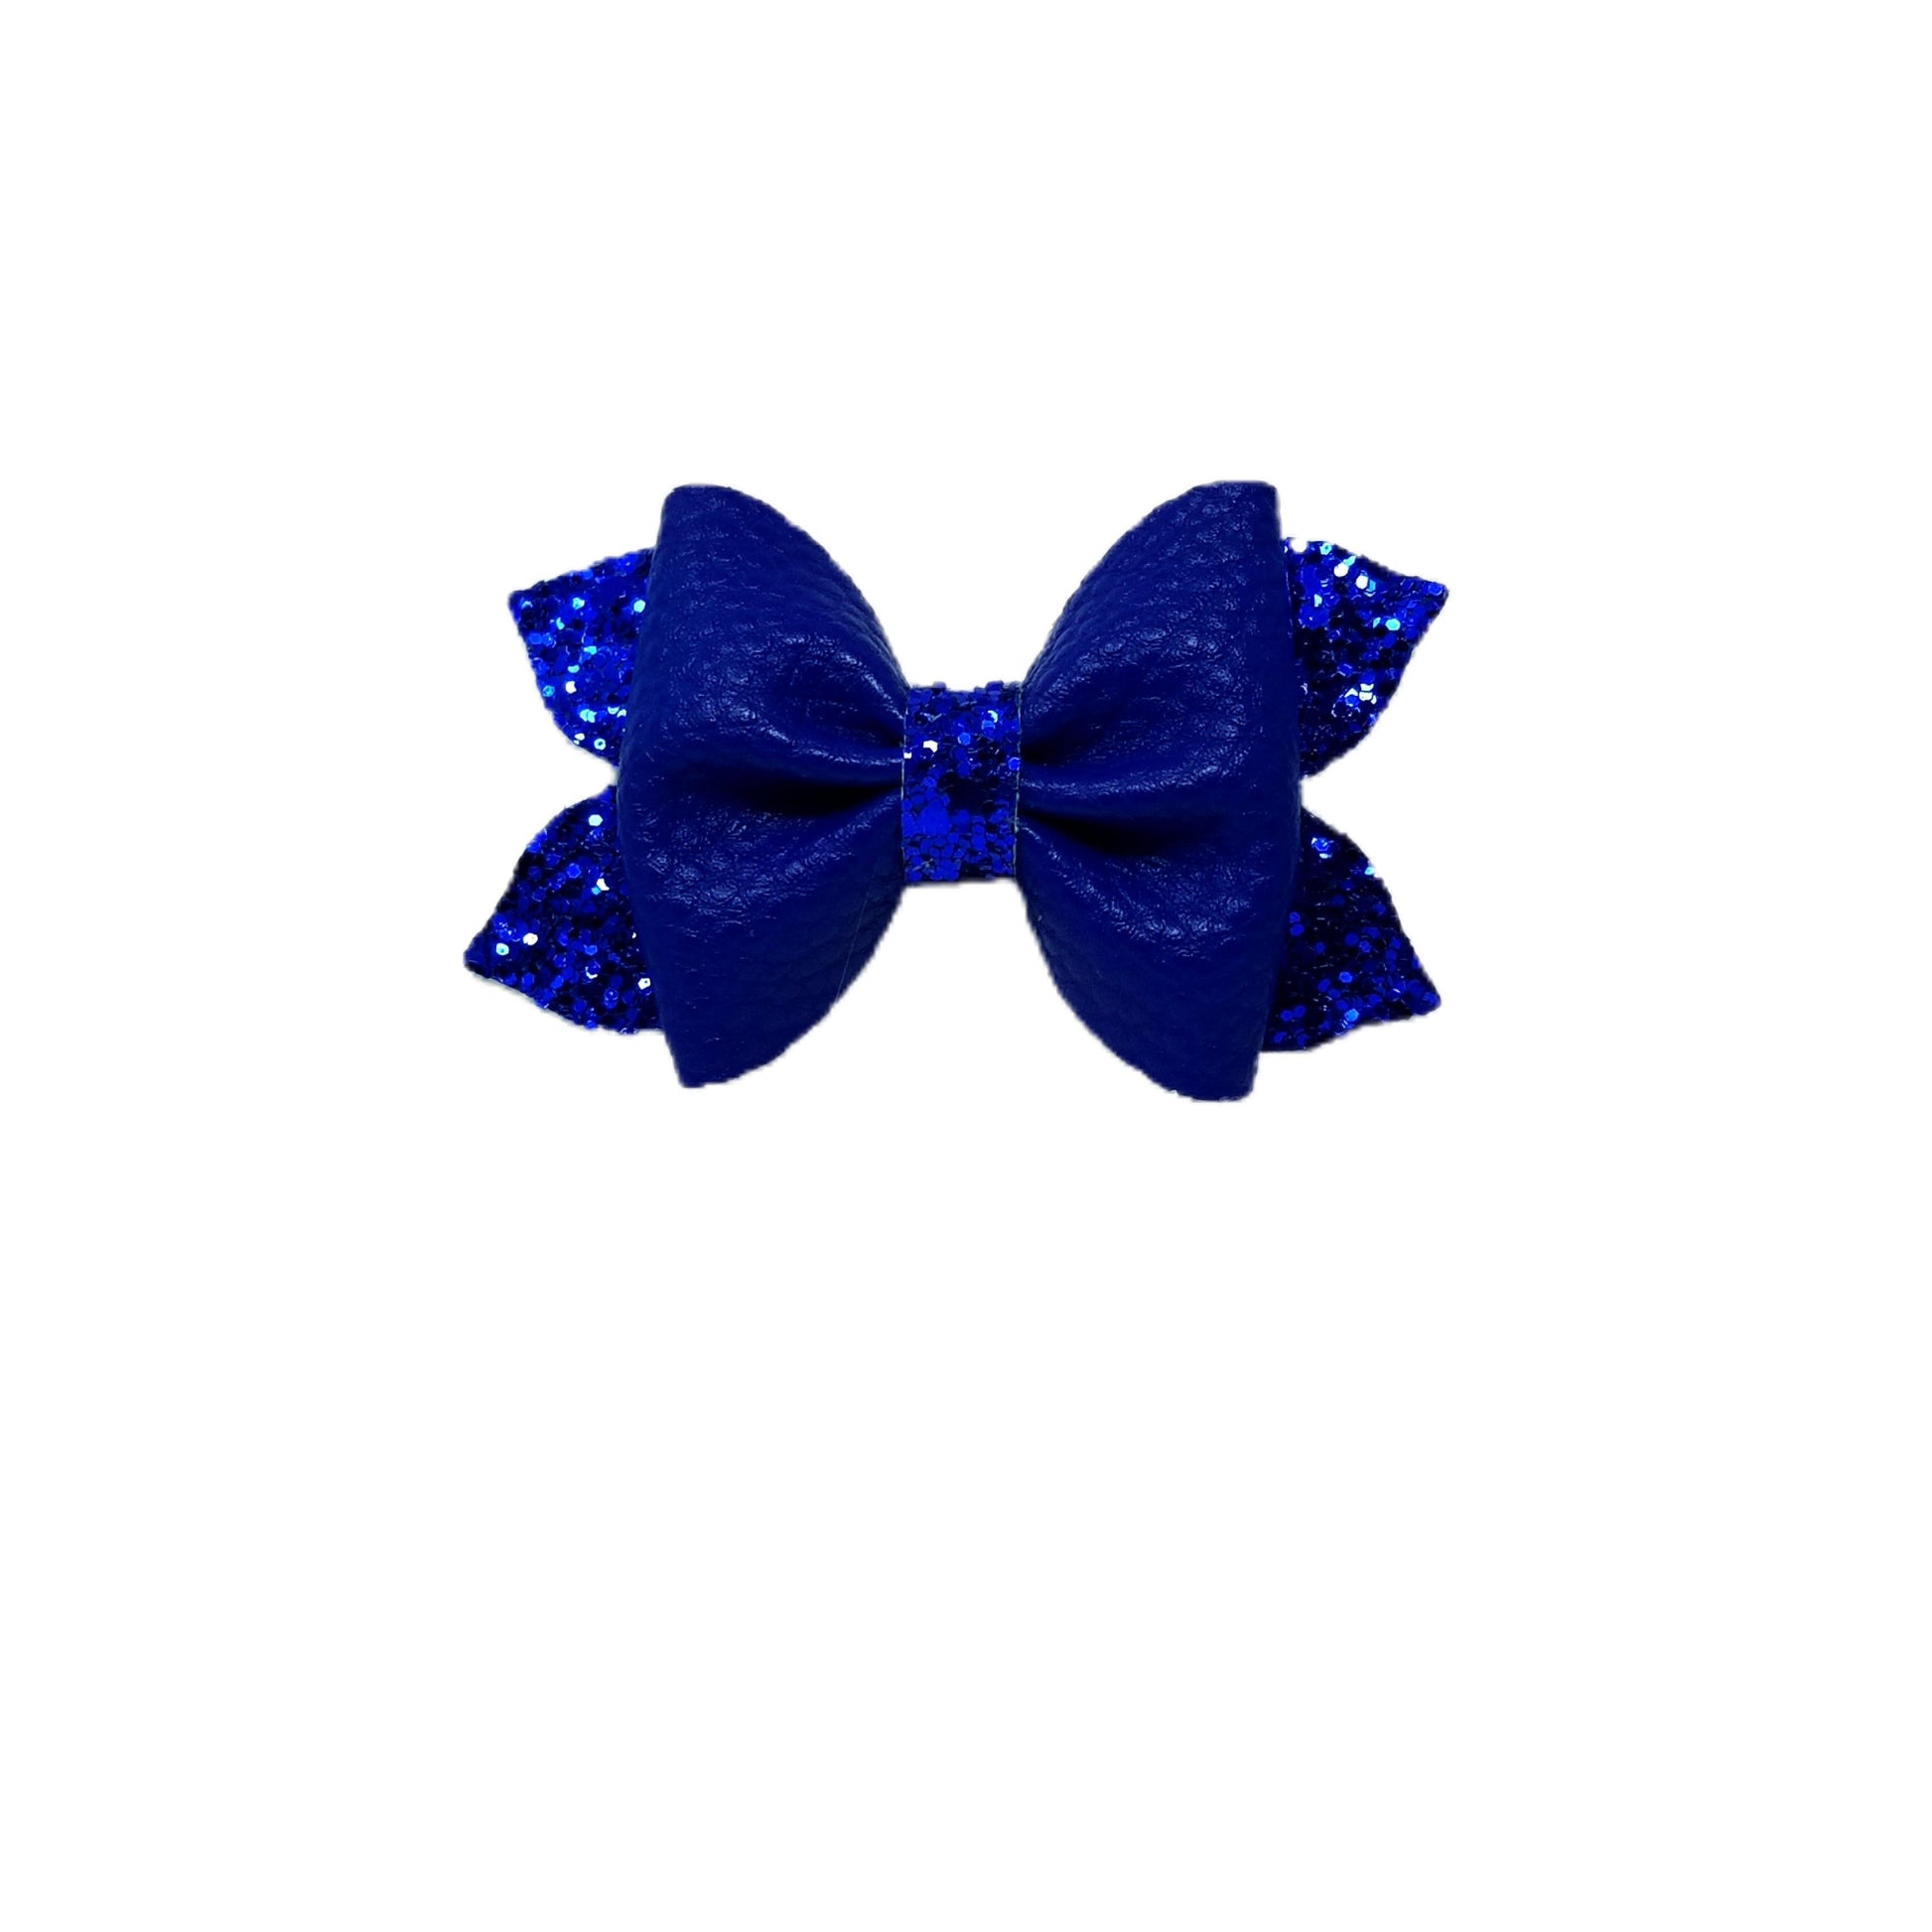 3 inch Royal Blue Pixie Pinch Bow